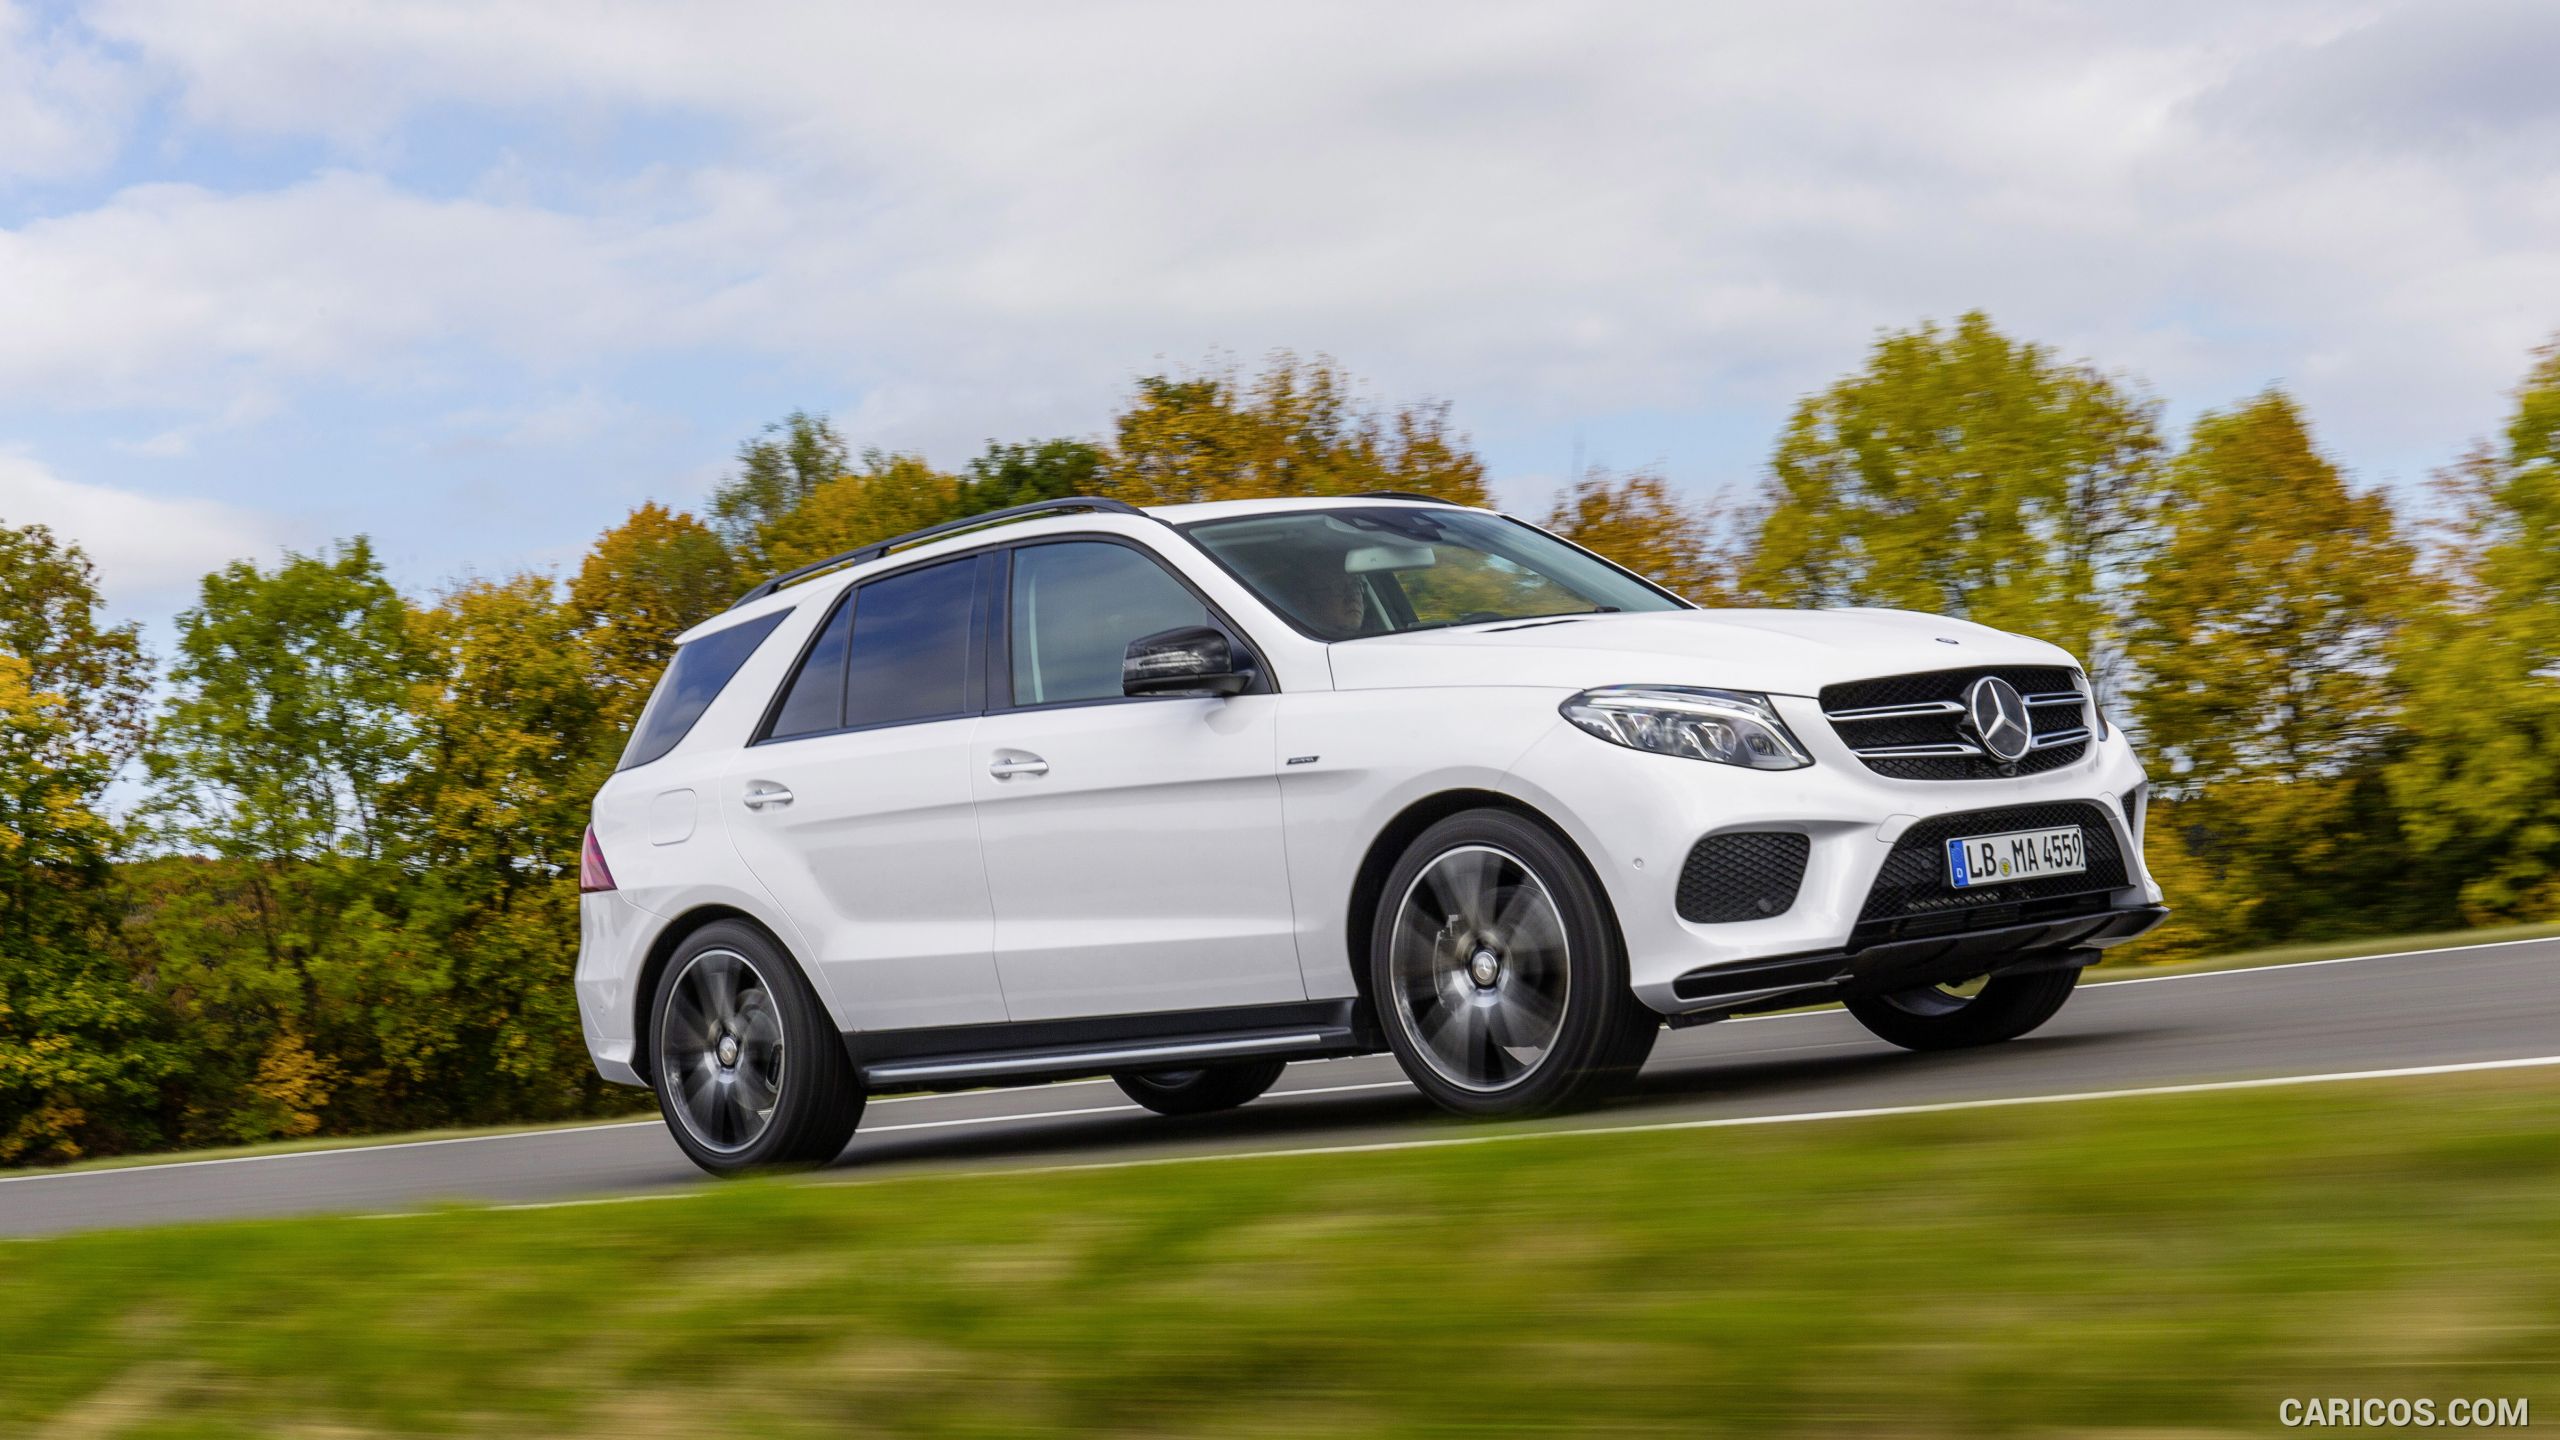 2016 Mercedes-Benz GLE 450 AMG 4MATIC - Front, #1 of 11